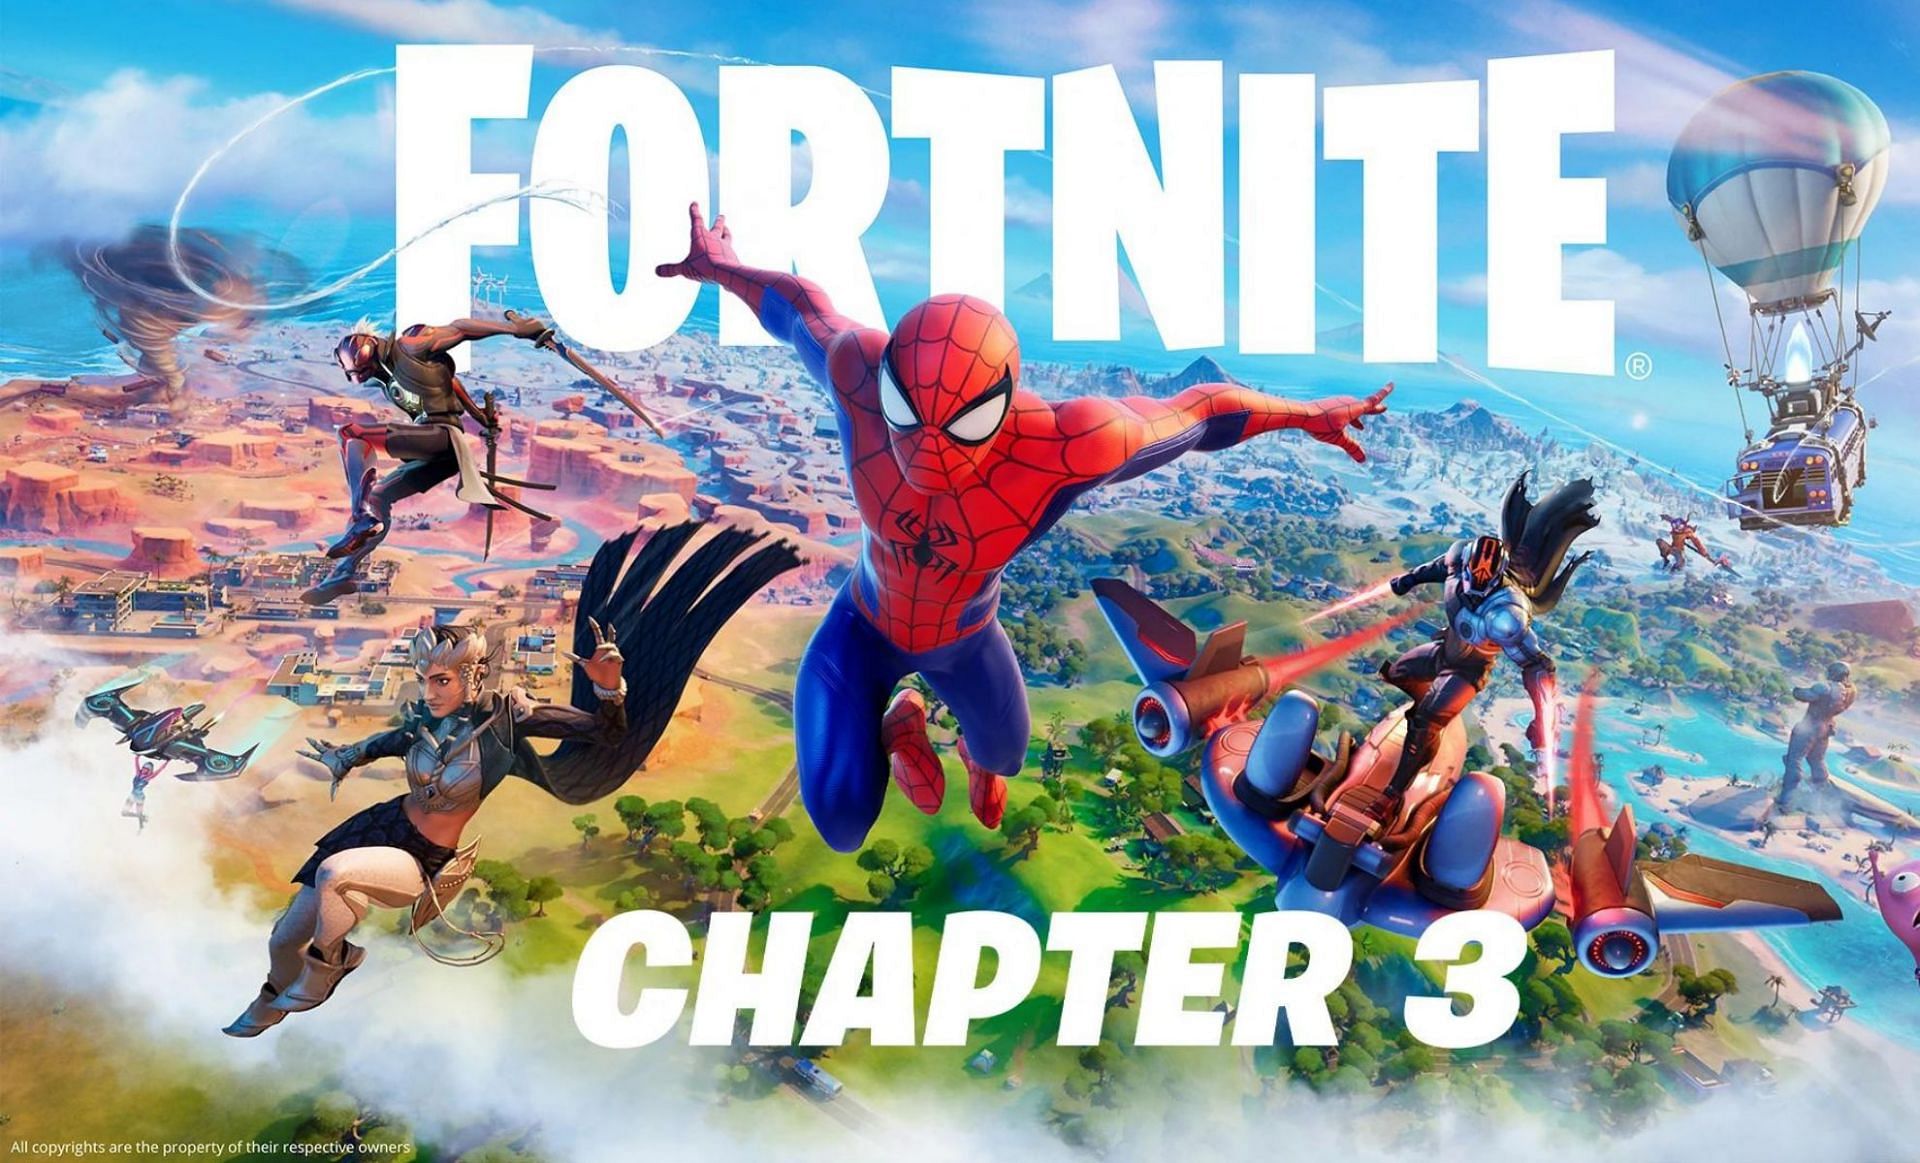 Chapter 3 Season 1 is coming to a close soon (Image via Epic Games)